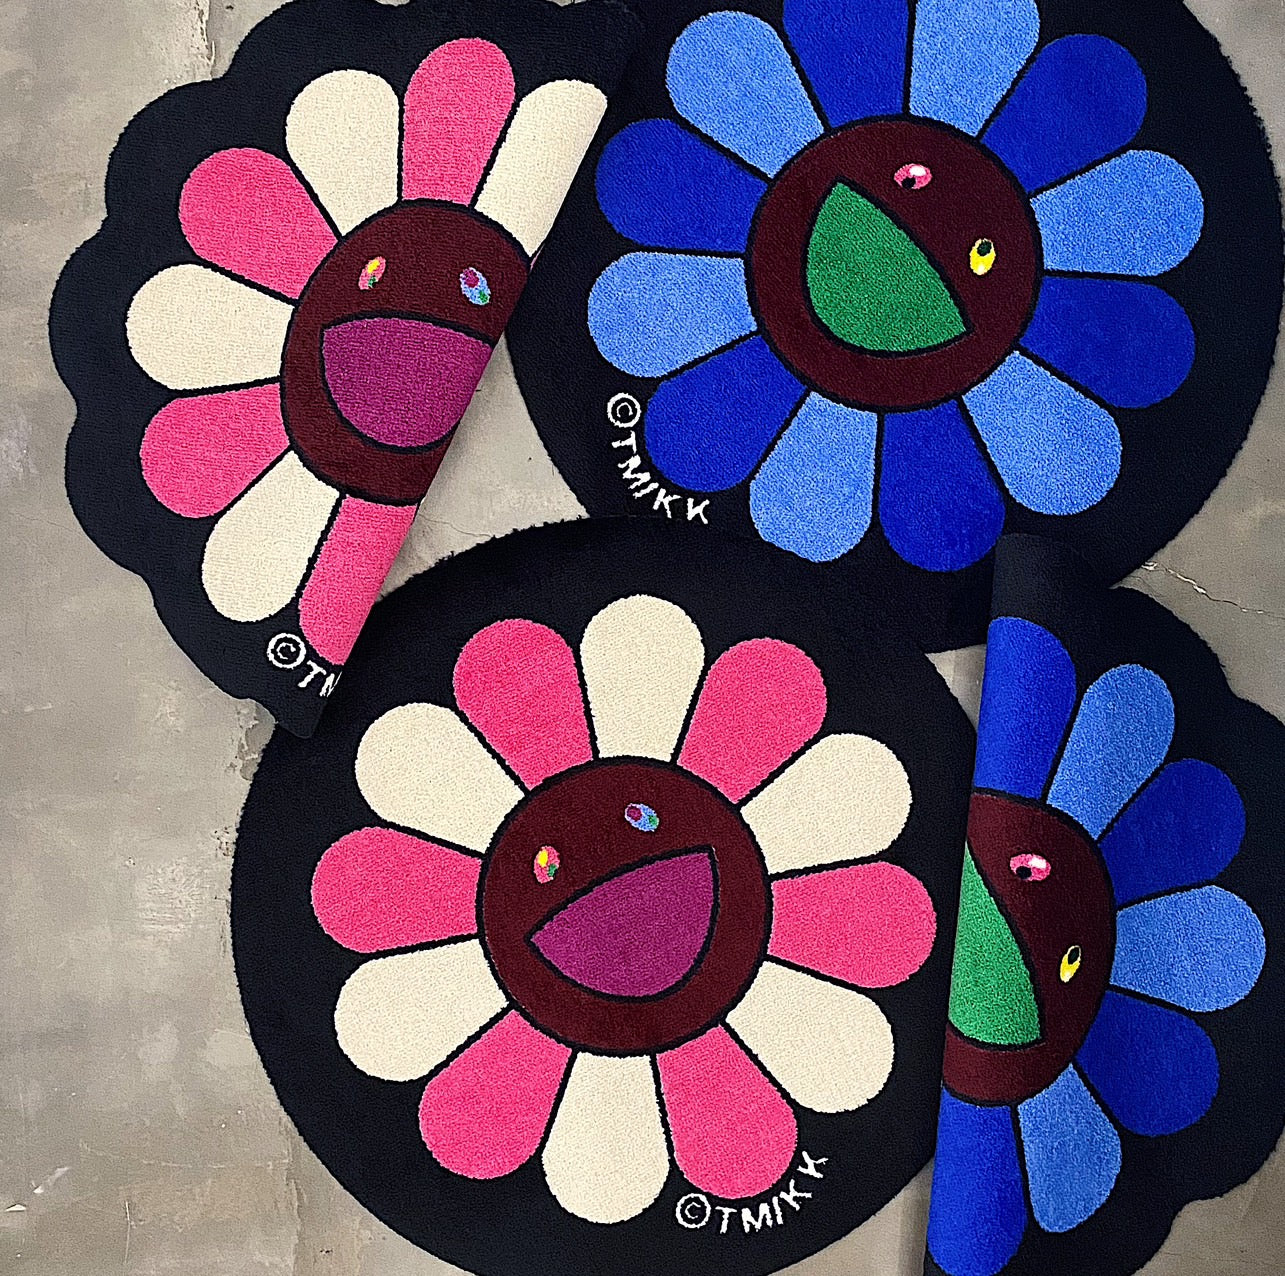 【©Takashi Murakami / kaikai kiki】<br /> Limited quantities of flower mats will be available online from 20:00 today, 5/1 (Mon.)!